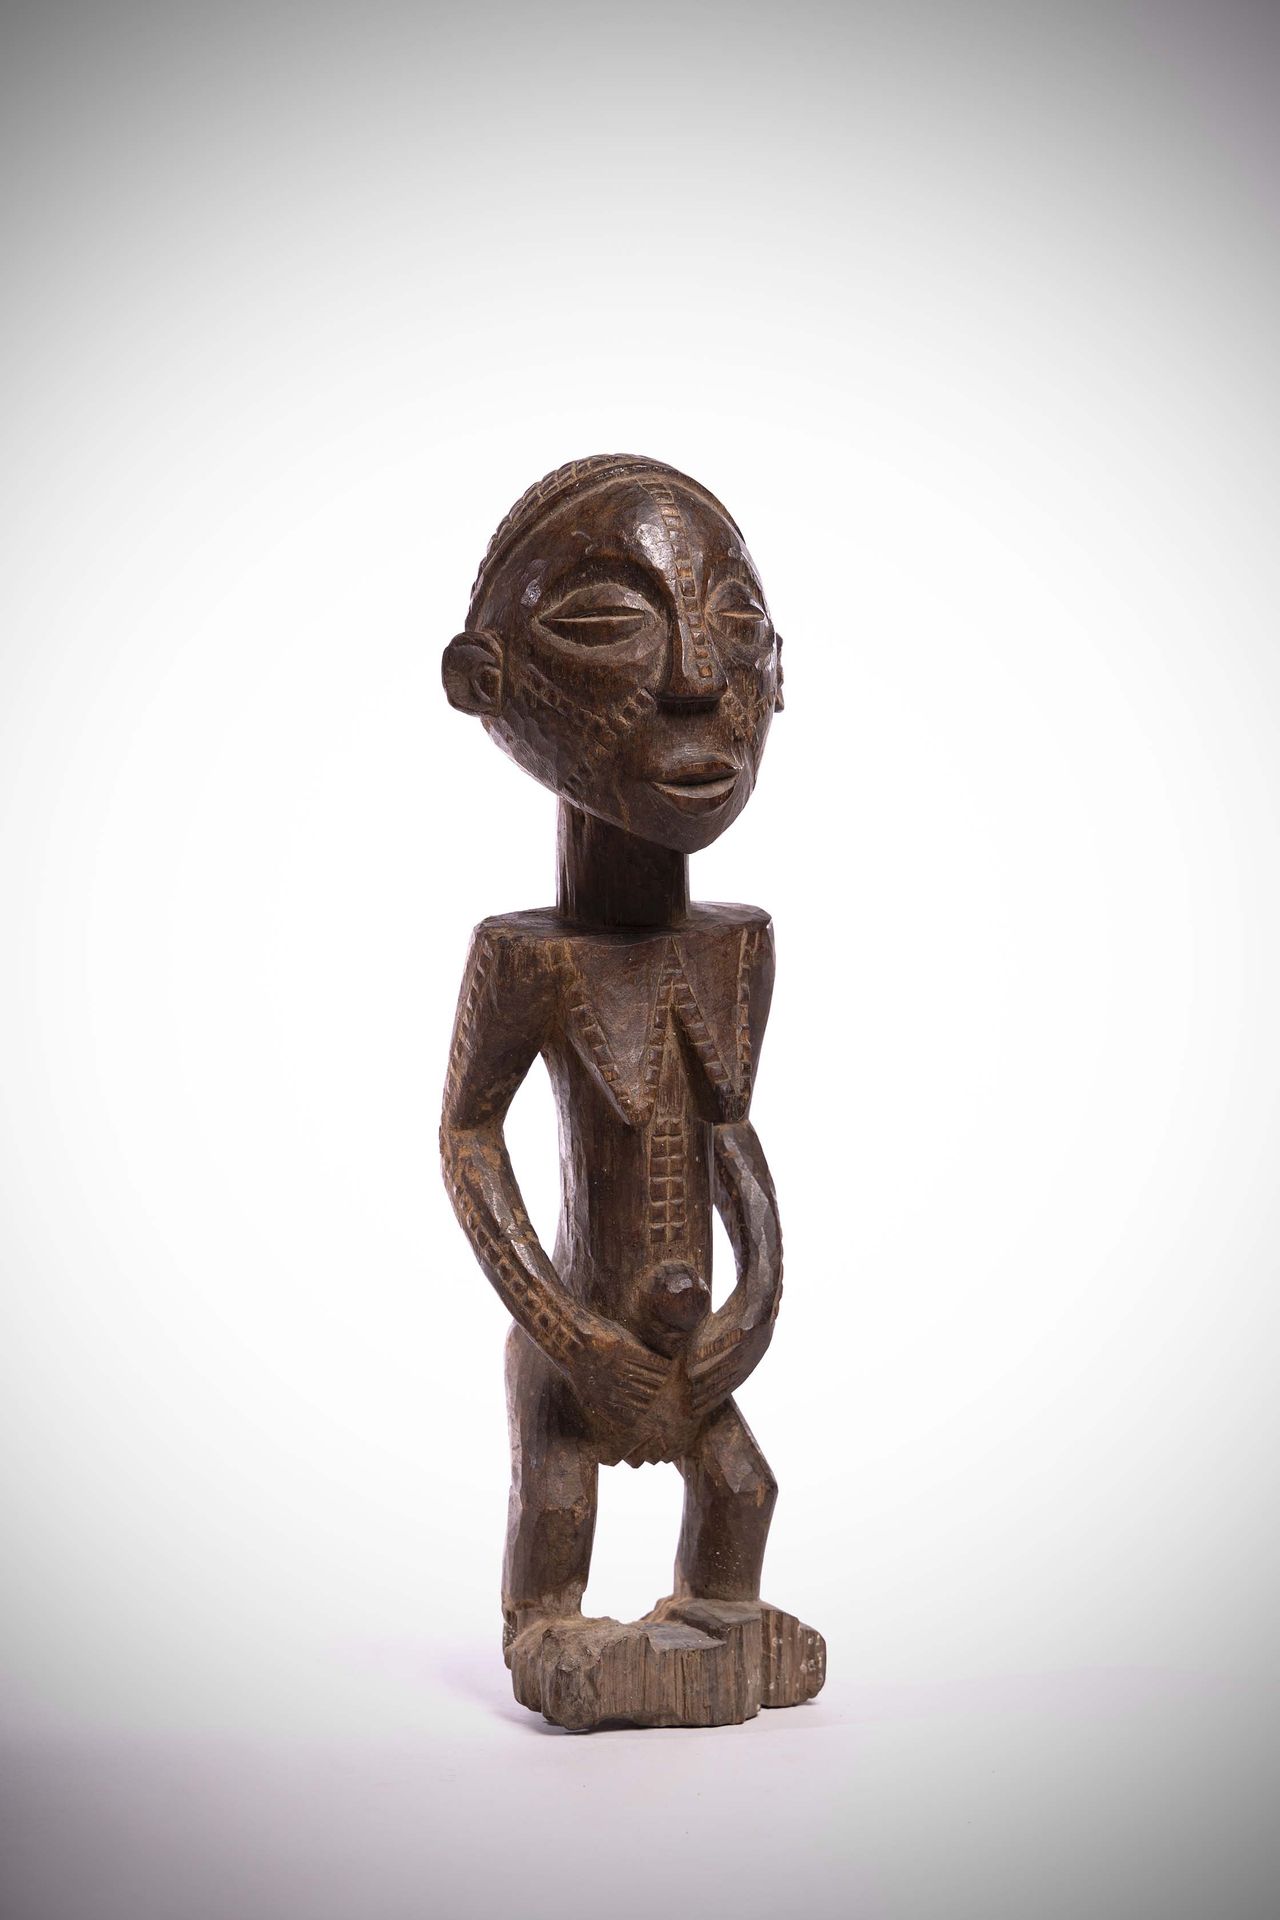 Null Tabwa

(DRC) Female statue with arms folded over the abdomen. 

She has sca&hellip;